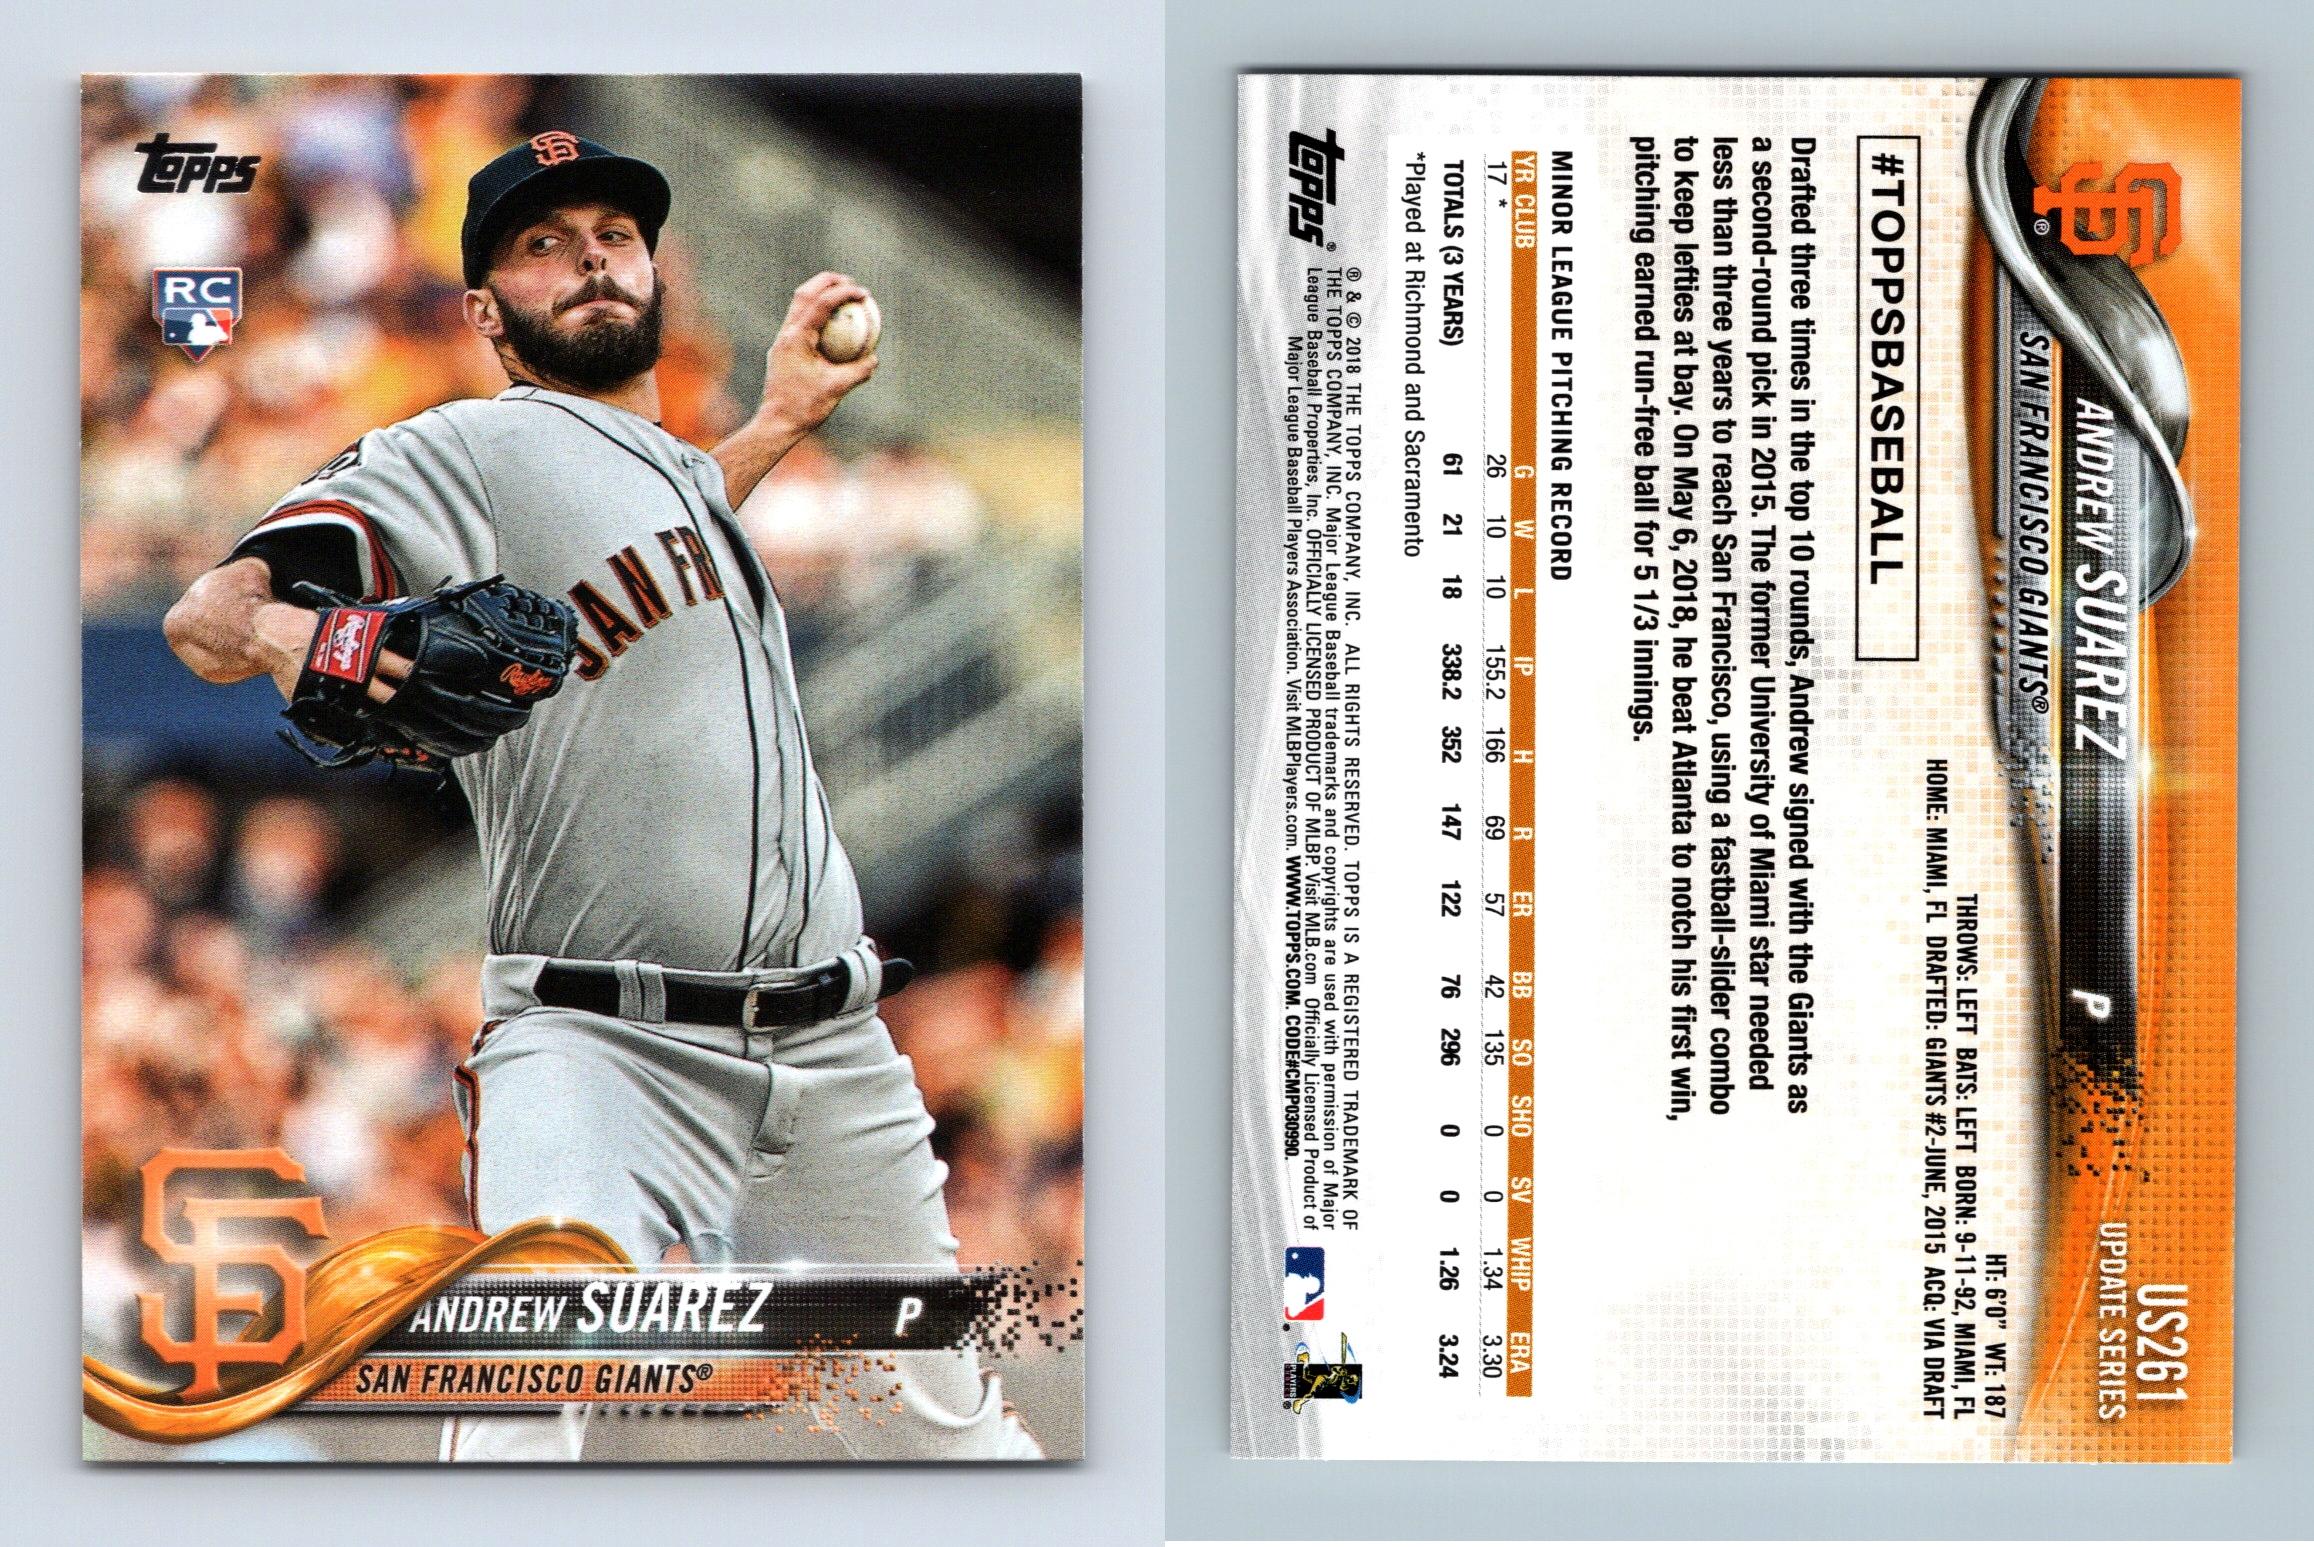 2018 Topps Update Baseball Rainbow Foil #US261 Andrew Suarez SF Giants at  's Sports Collectibles Store